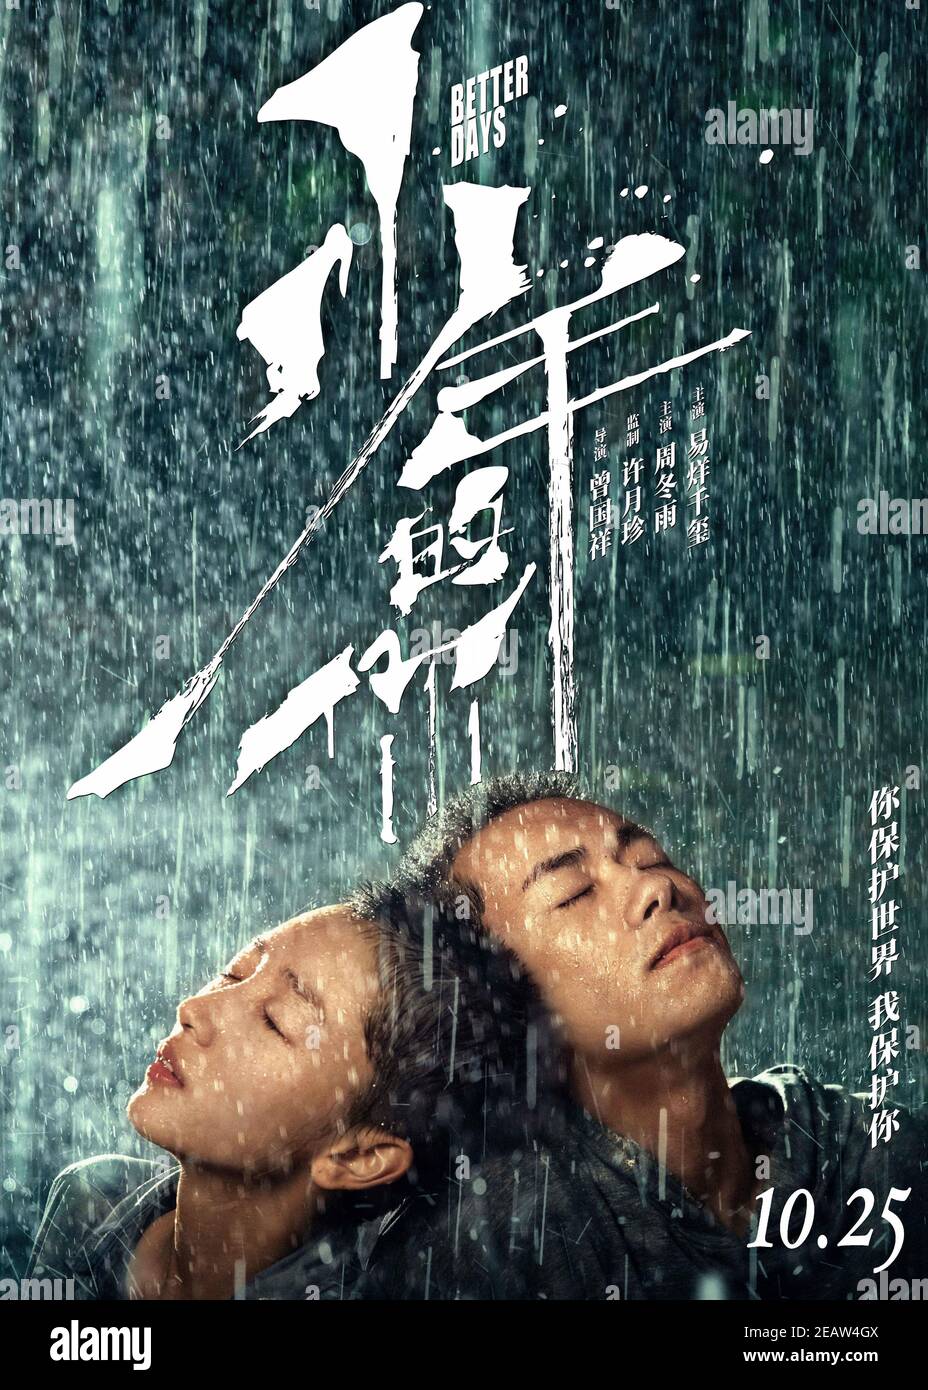 Better Day (2019) directed by Derek Tsang and starring Dongyu Zhou, Jackson Yee and Fang Yin. Adaptation of Jiu Yuex's novel 'In His Youth, In Her Beauty' about a bullied teenage girl forms an unlikely friendship with a mysterious young man. Stock Photo